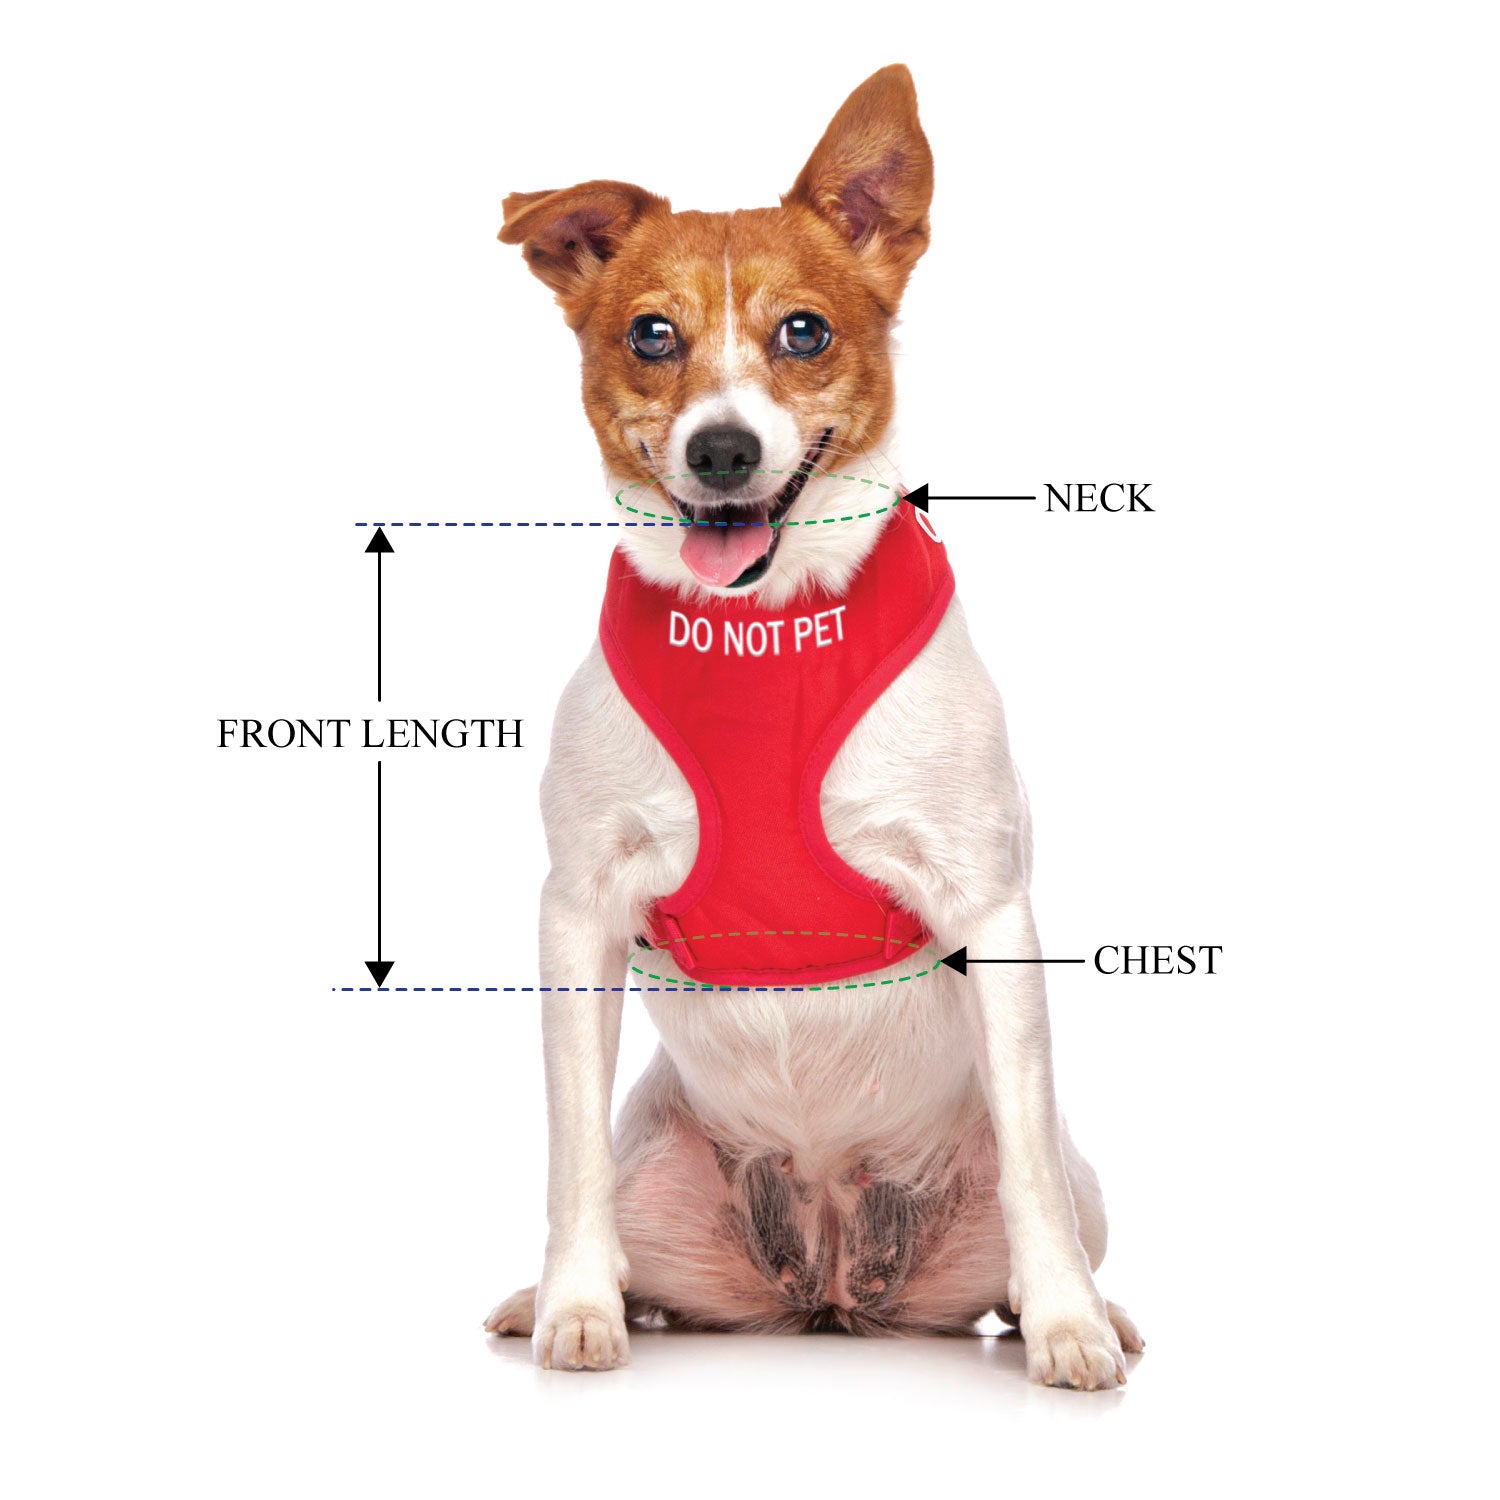 DO NOT PET - Small adjustable Vest Harness